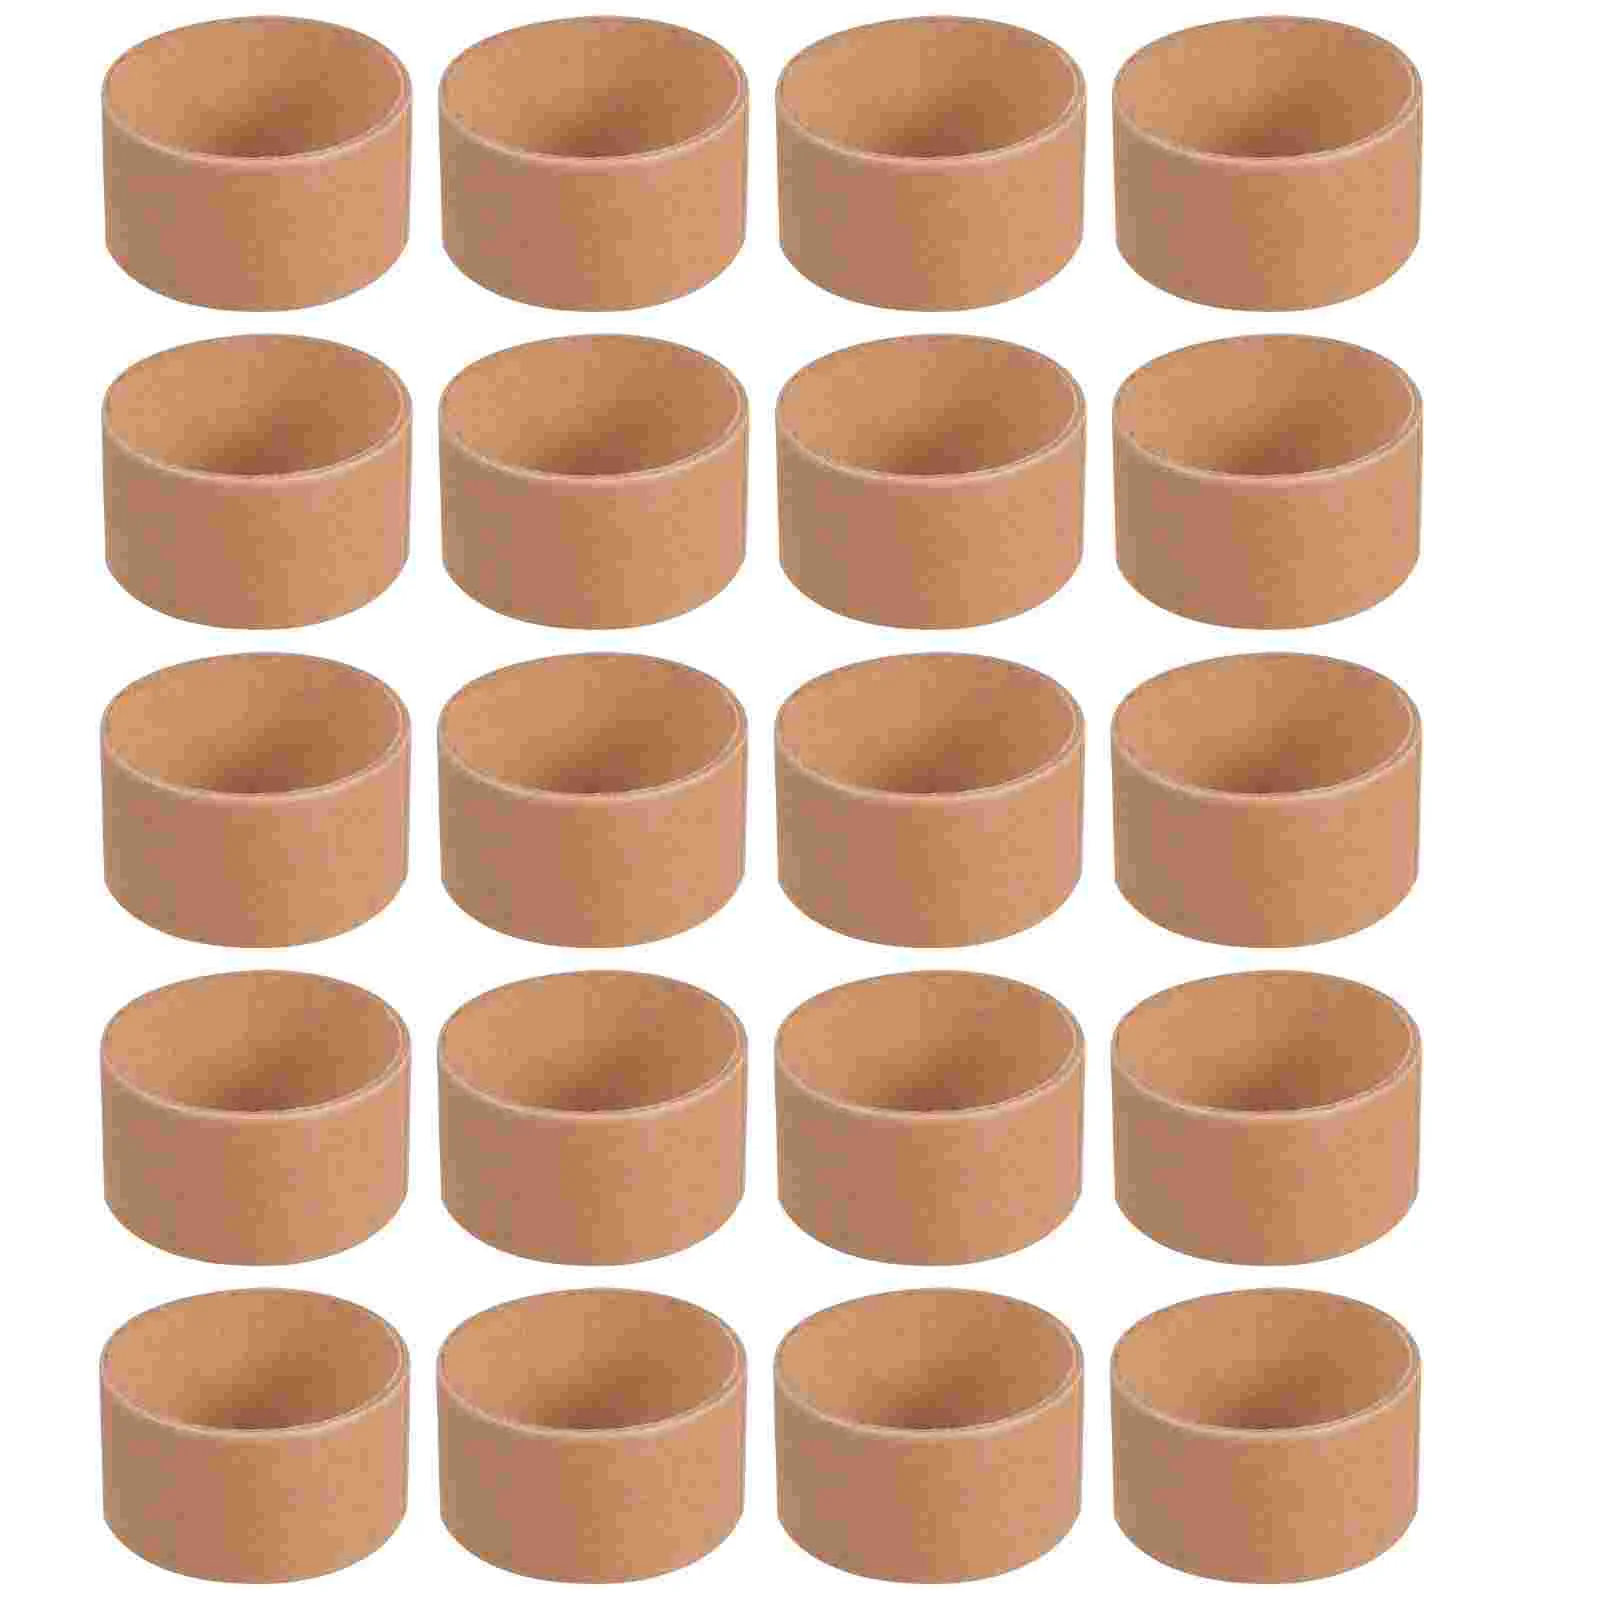 Paper Cardboard Roll Crafts Toilet Tubes Tubes Tube Diy Craftroll Brown Crafts Kraft Round Towel Art Rolls Thin Small Empty